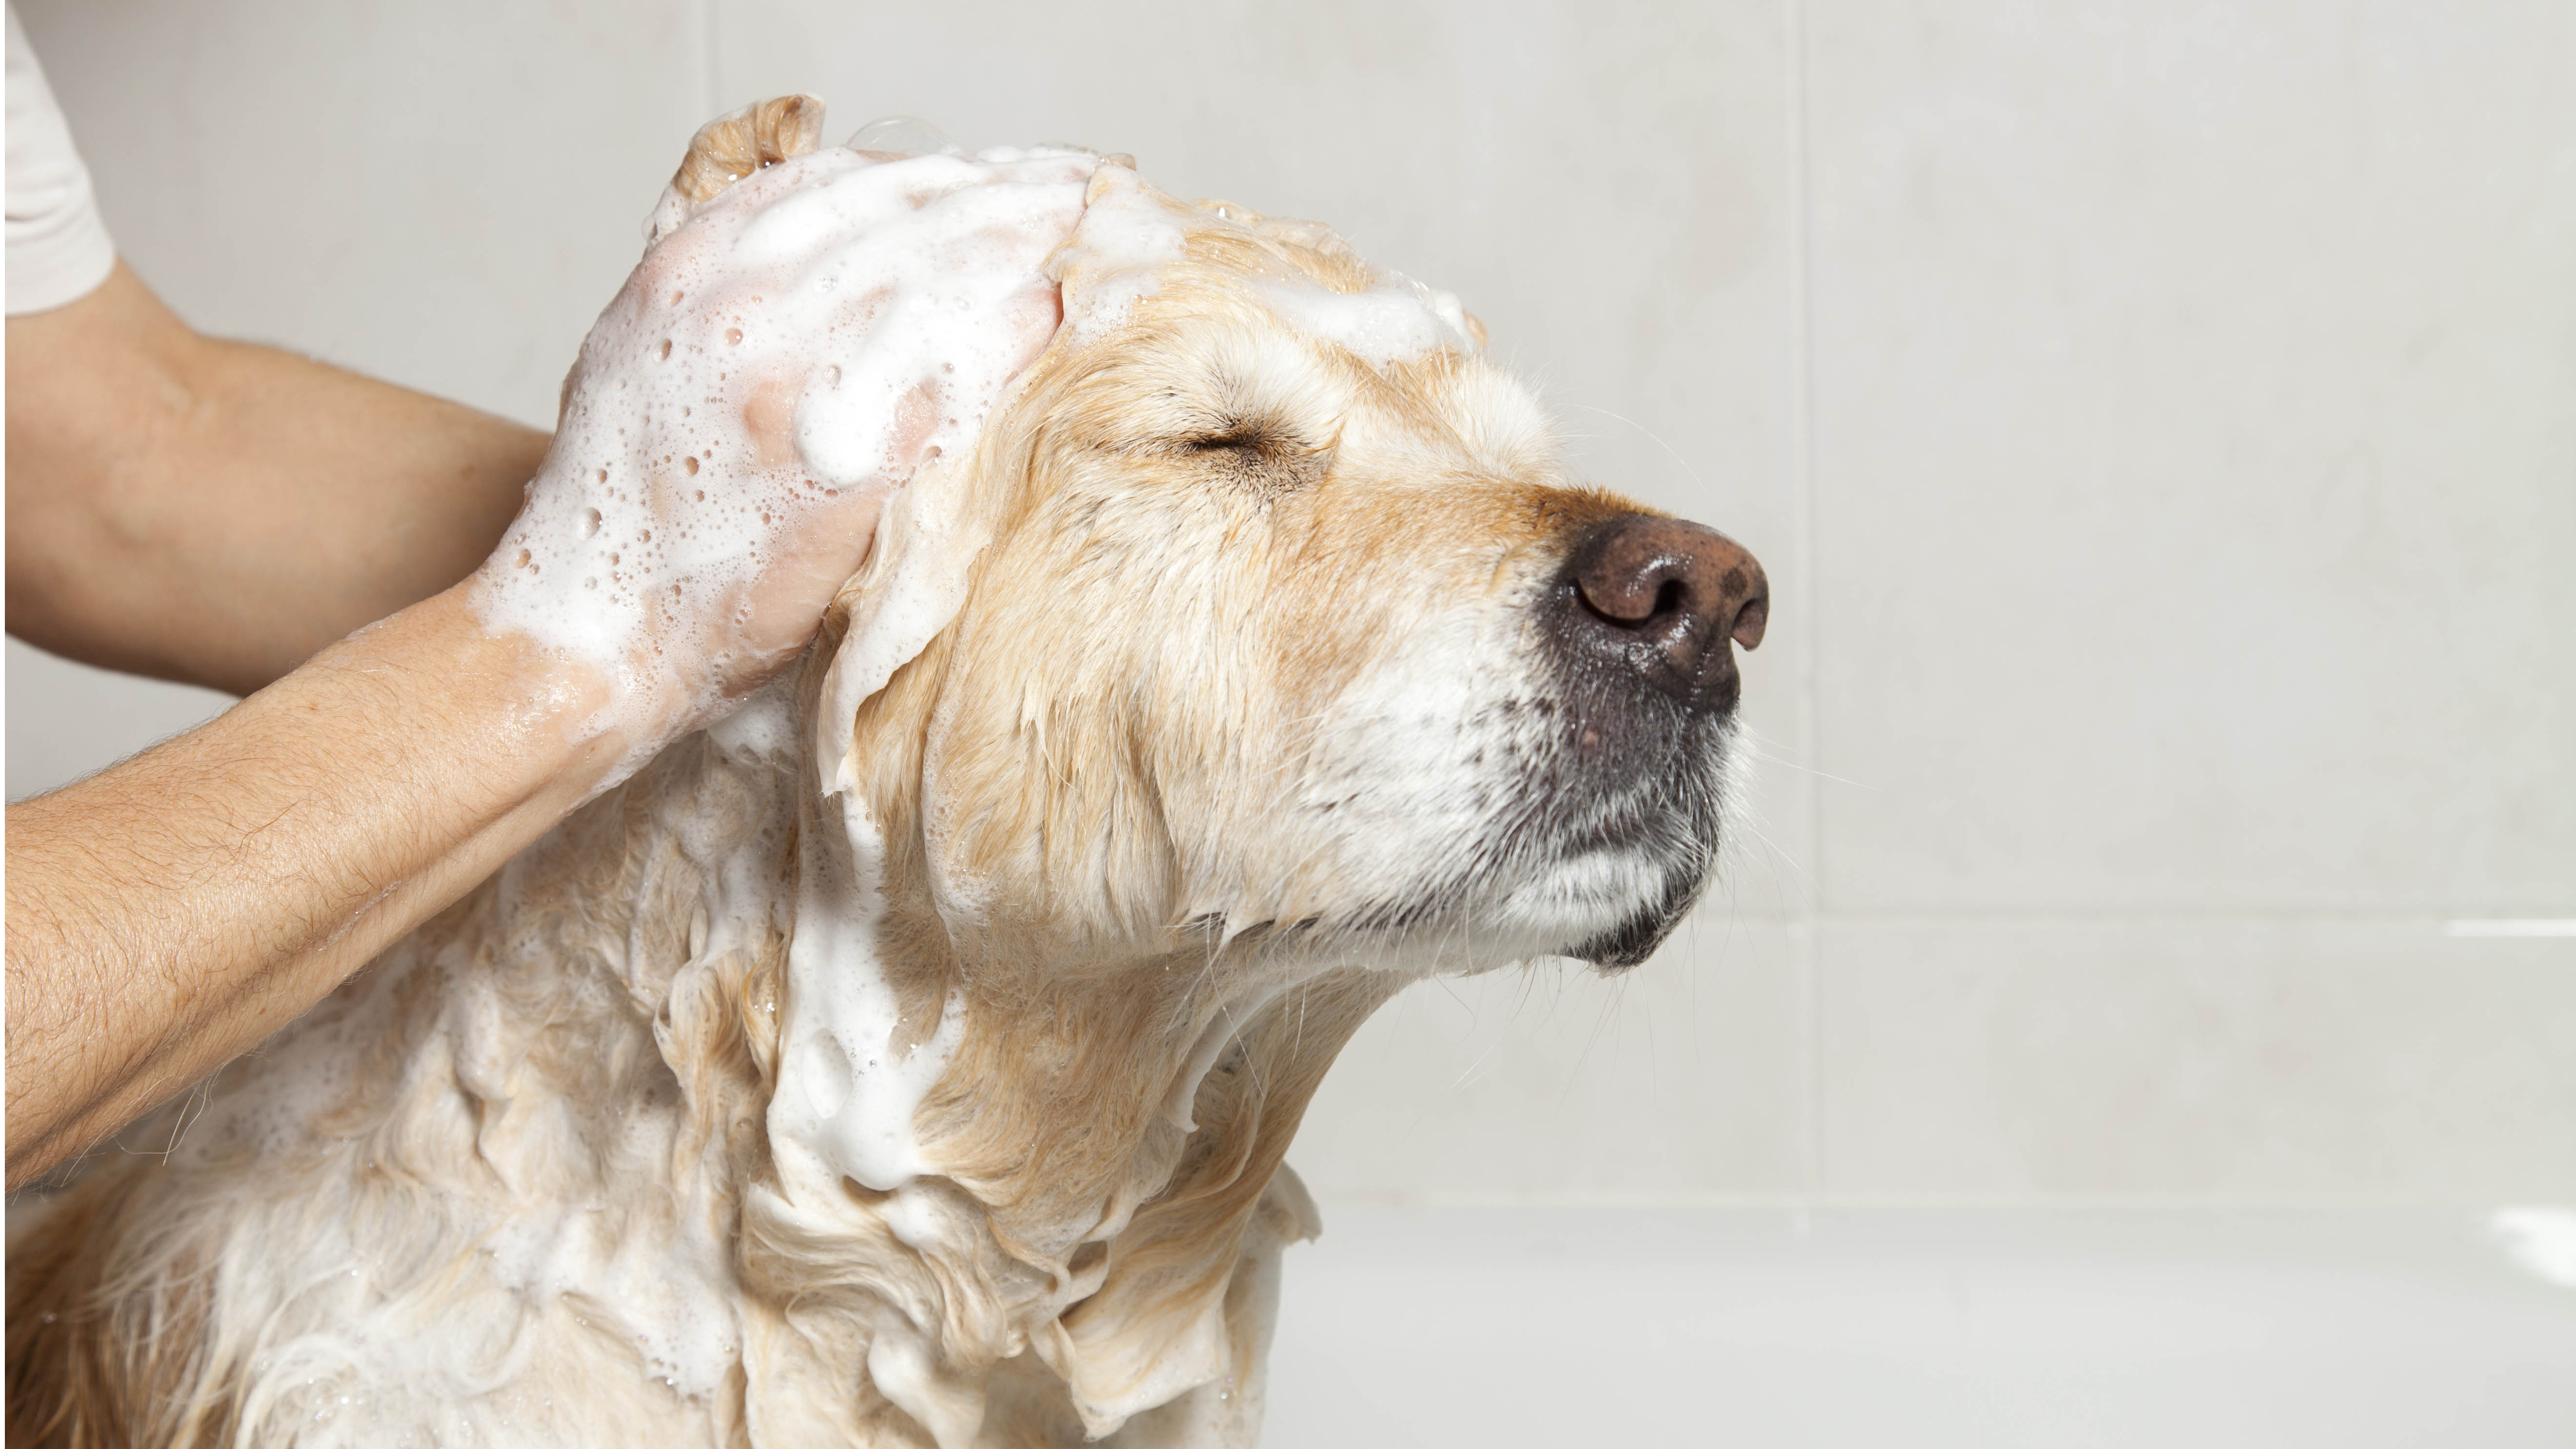 A dog taking a bath with soap